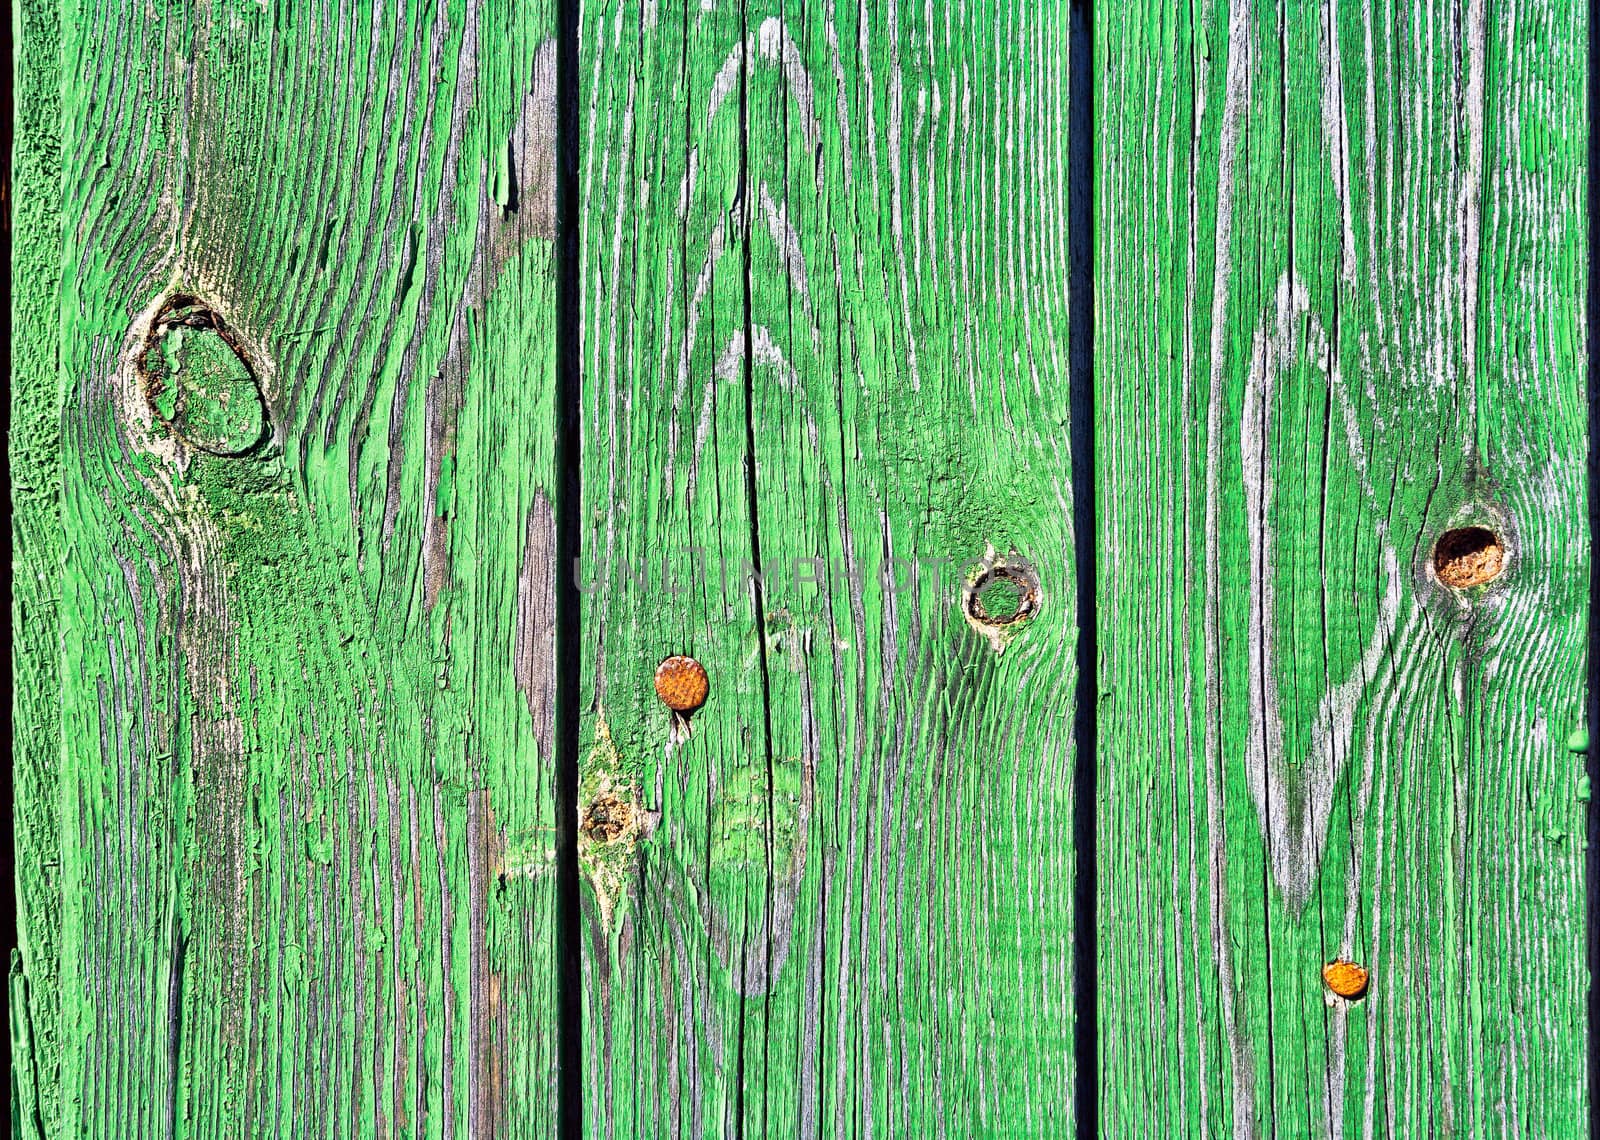 Old Wood Background. Old wooden boards painted in green